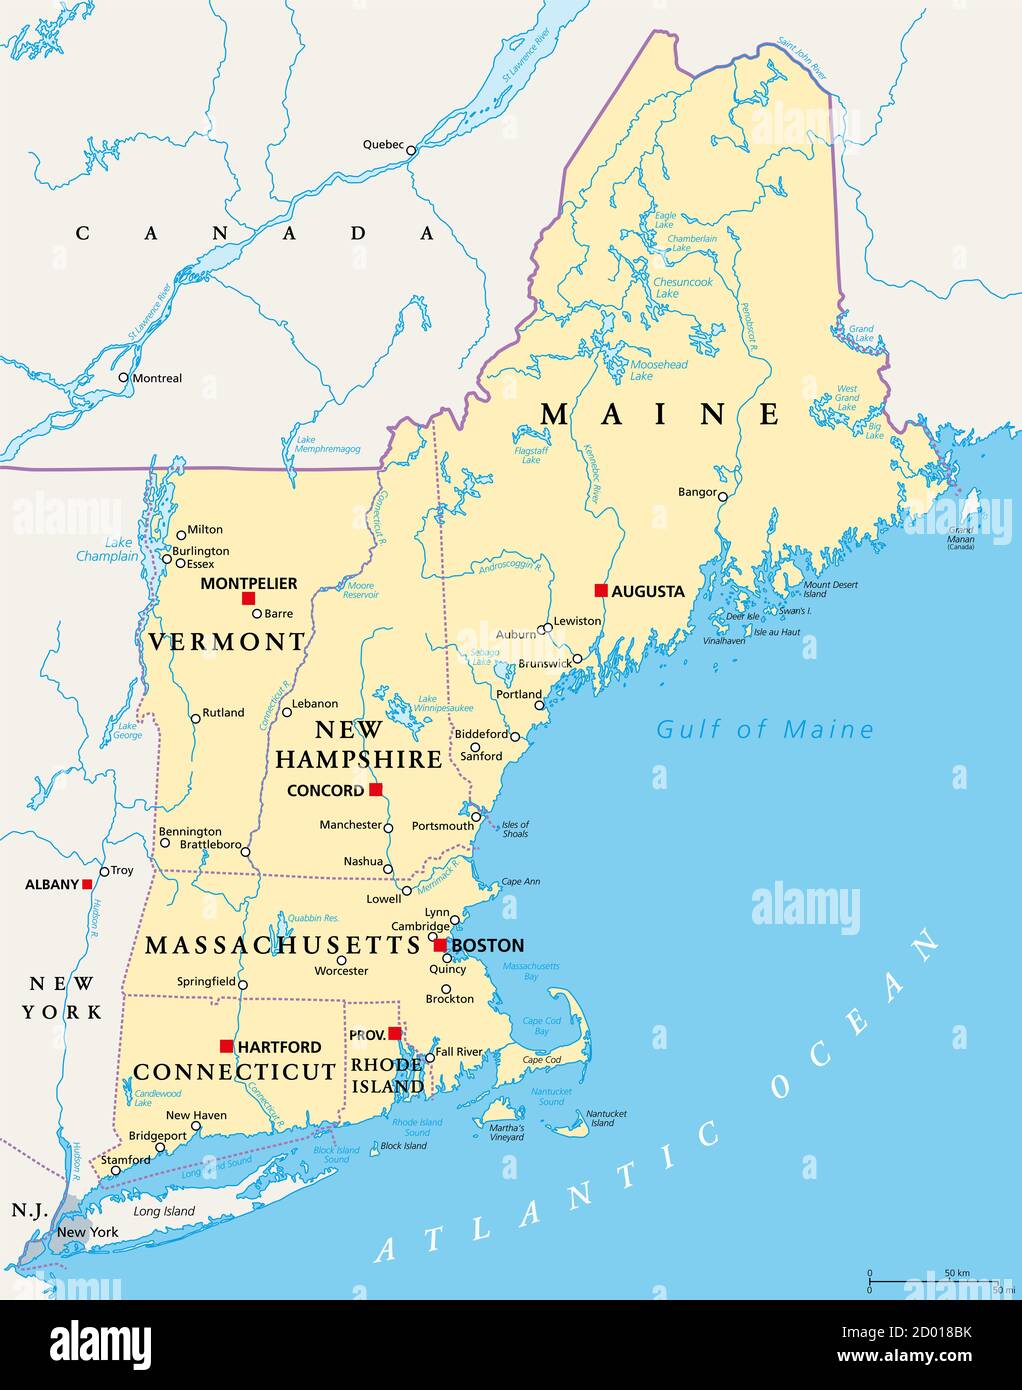 New England region of the United States of America, political map. Maine, Vermont, New Hampshire, Massachusetts, Rhode Island and Connecticut. Stock Photo